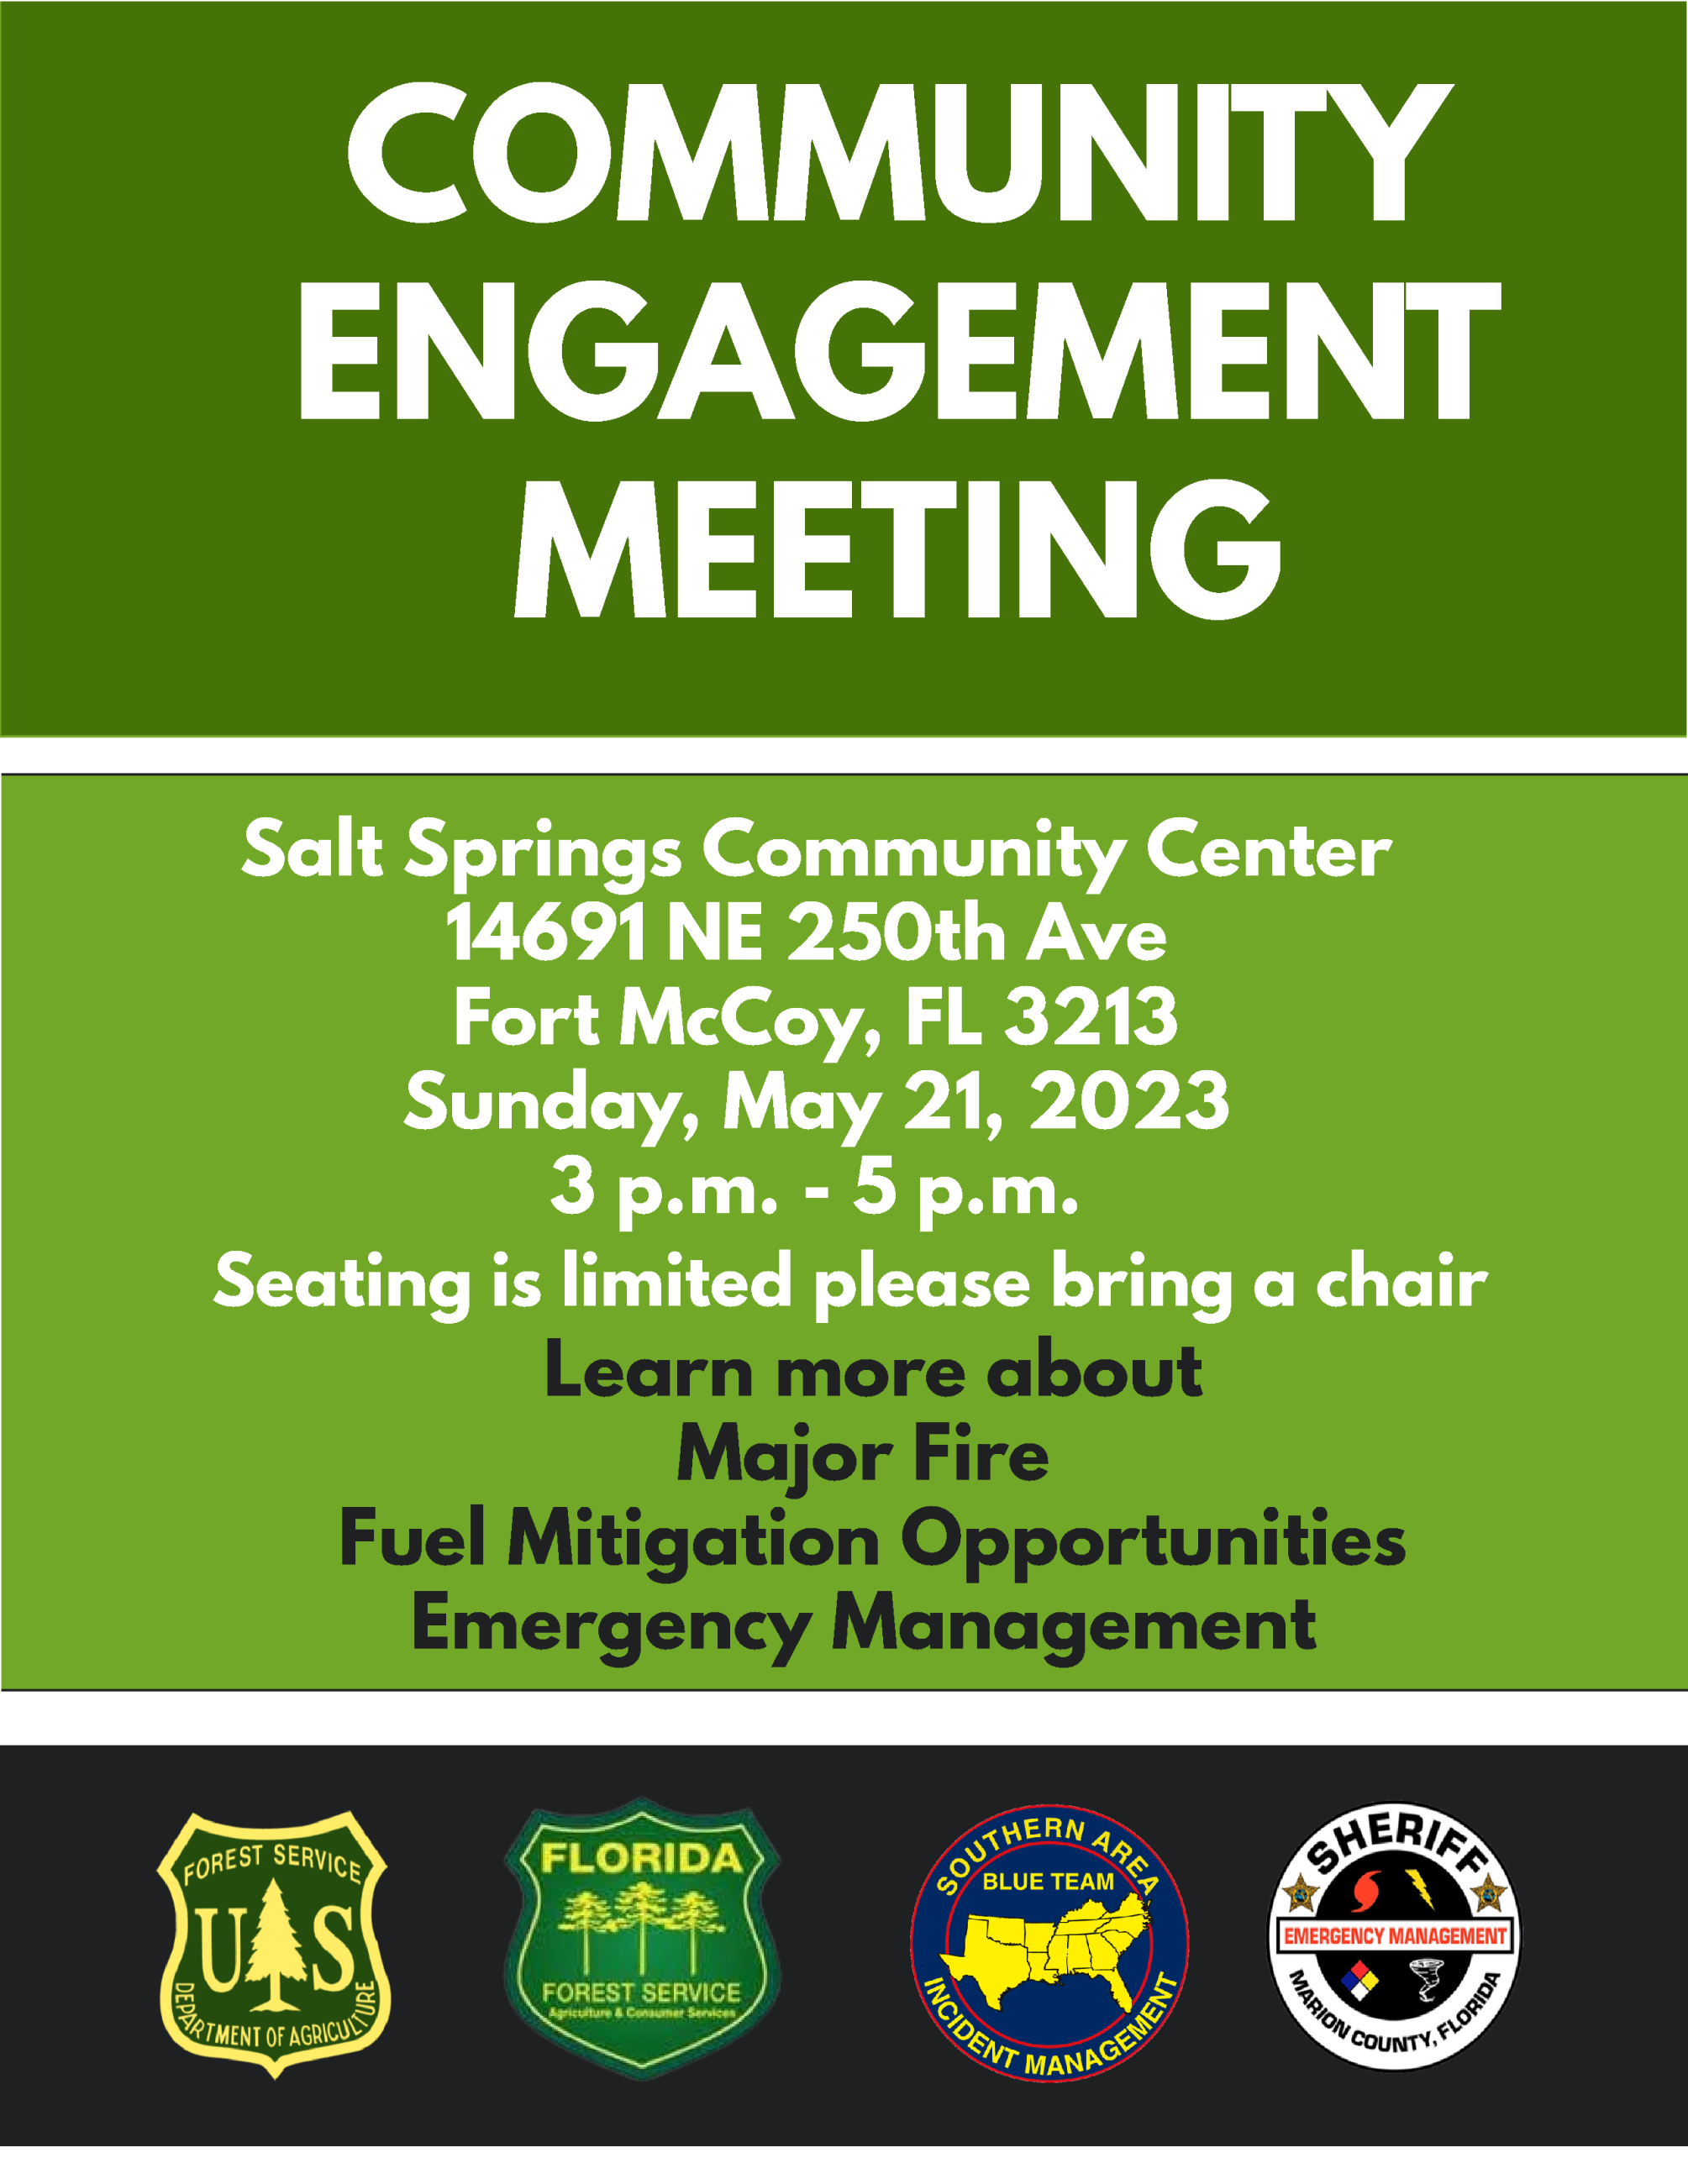 A community engagement meeting will be held for the Salt Springs and Sportsman’s Haven communities on Sunday, May 21, from 3:00-5:00 pm at the Salt Springs Community Center located at 14691 NE 250th Avenue, Salt Springs, Florida. This meeting will provide a chance for local community members to learn more about the Major Fire and the current community fuels mitigation project. 